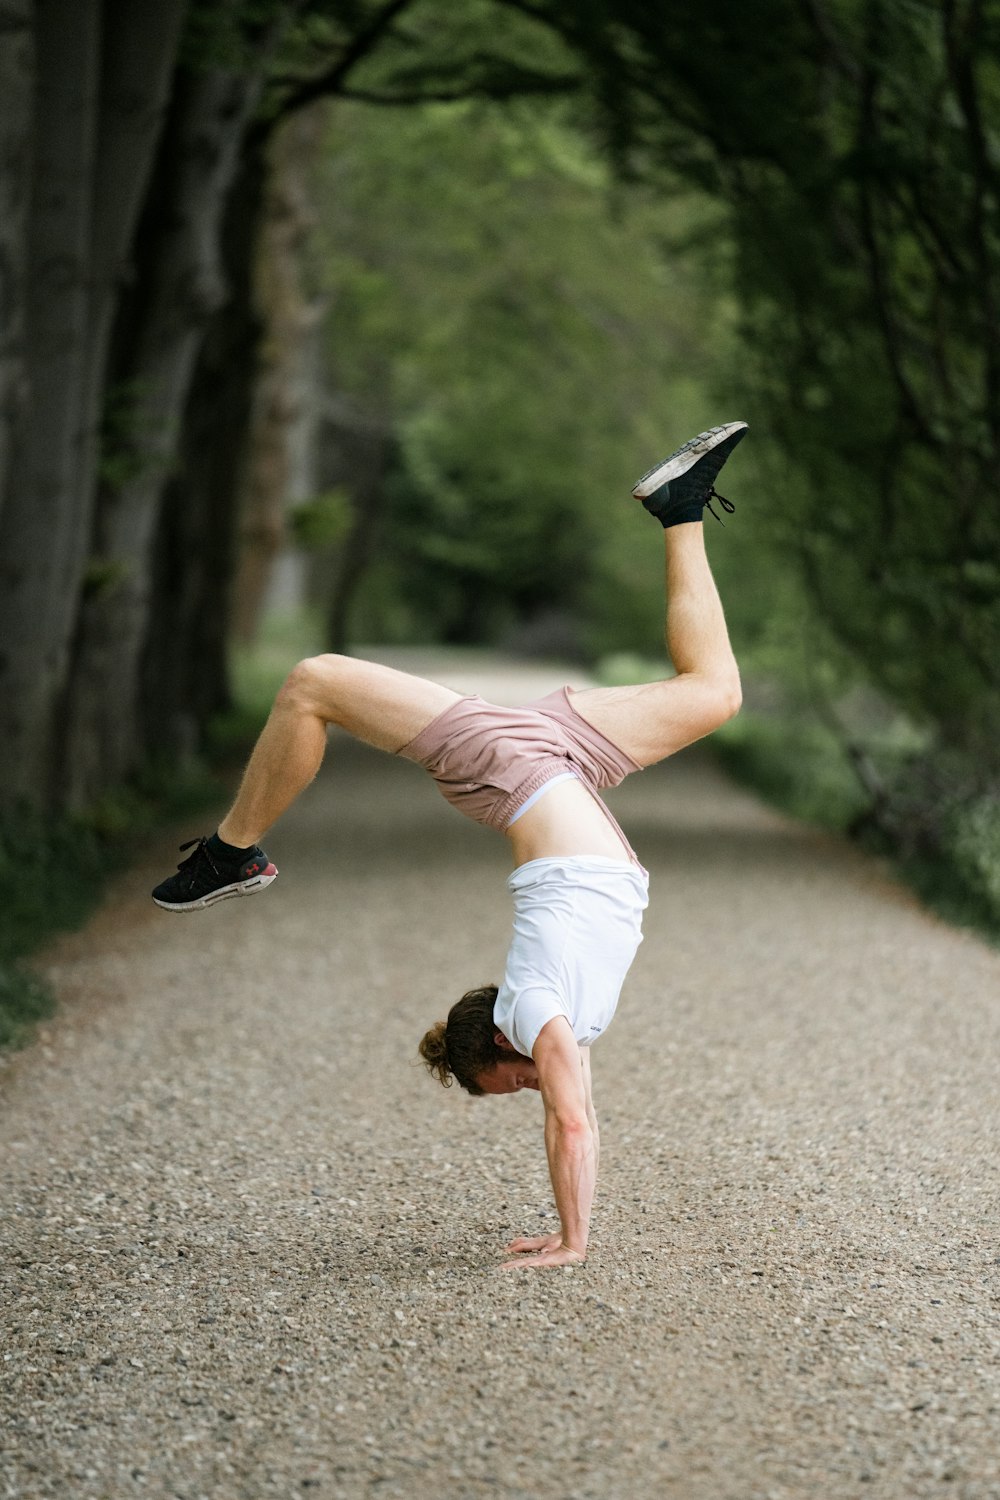 a person doing a handstand on a dirt path